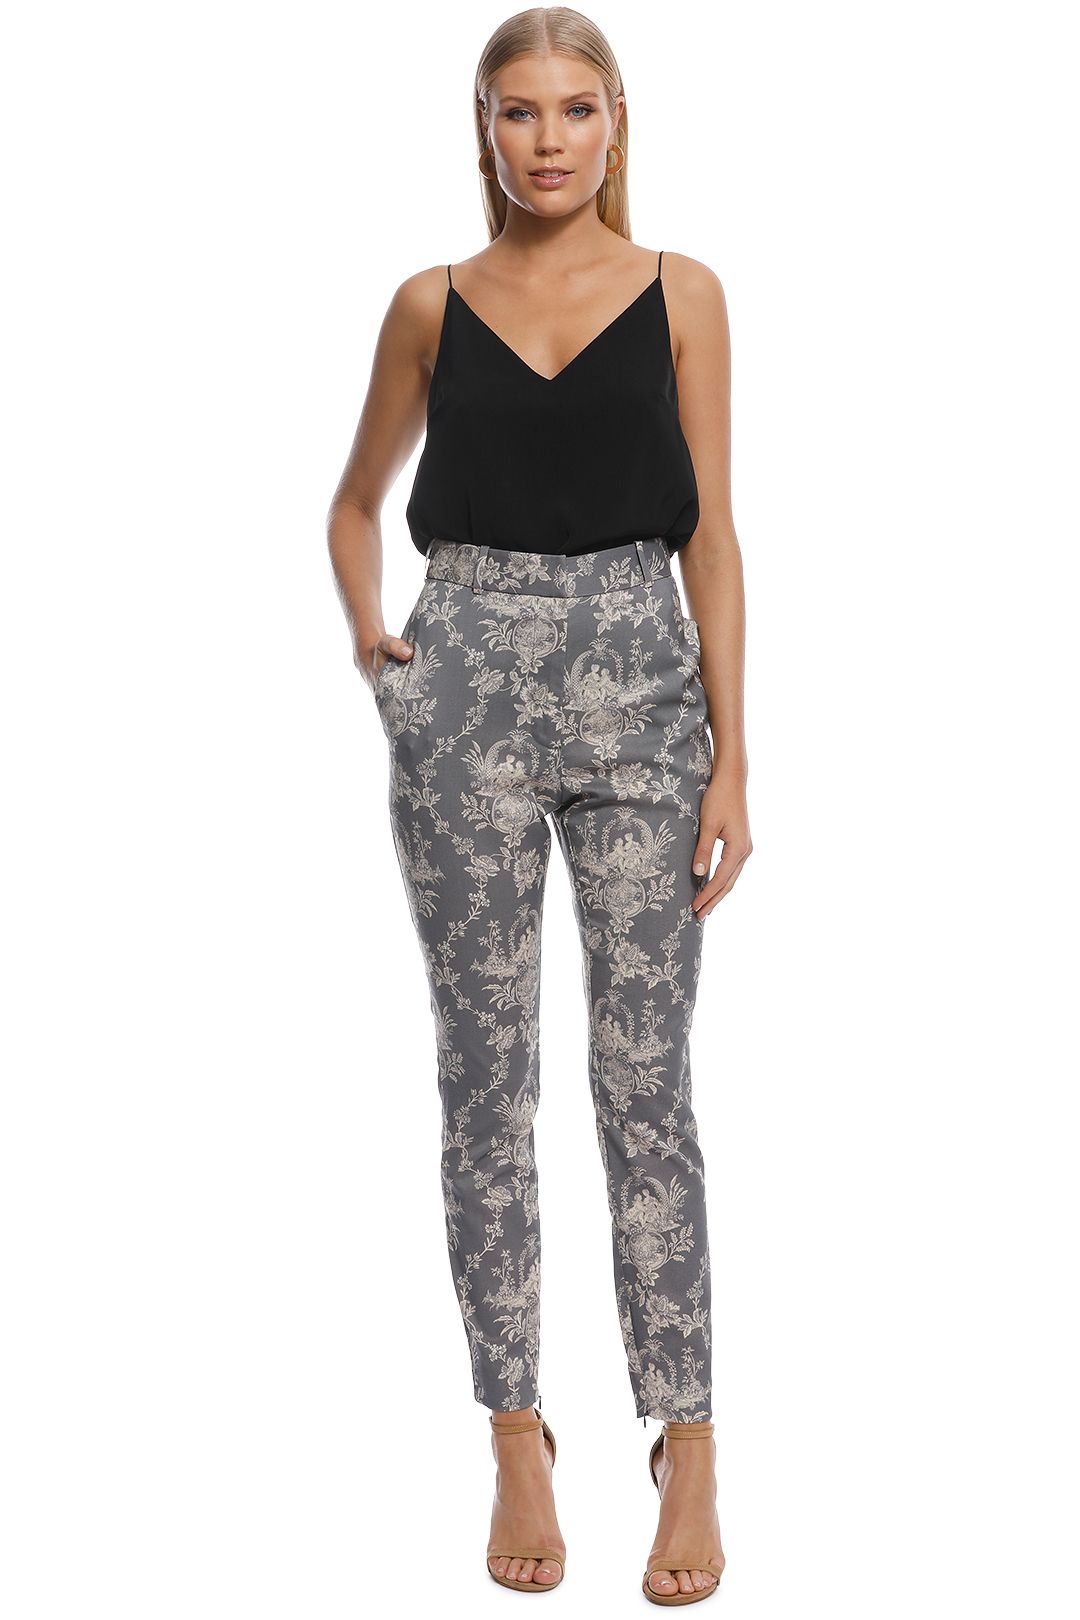 Fleeting Stovepipe Pants by Zimmermann for Rent | GlamCorner